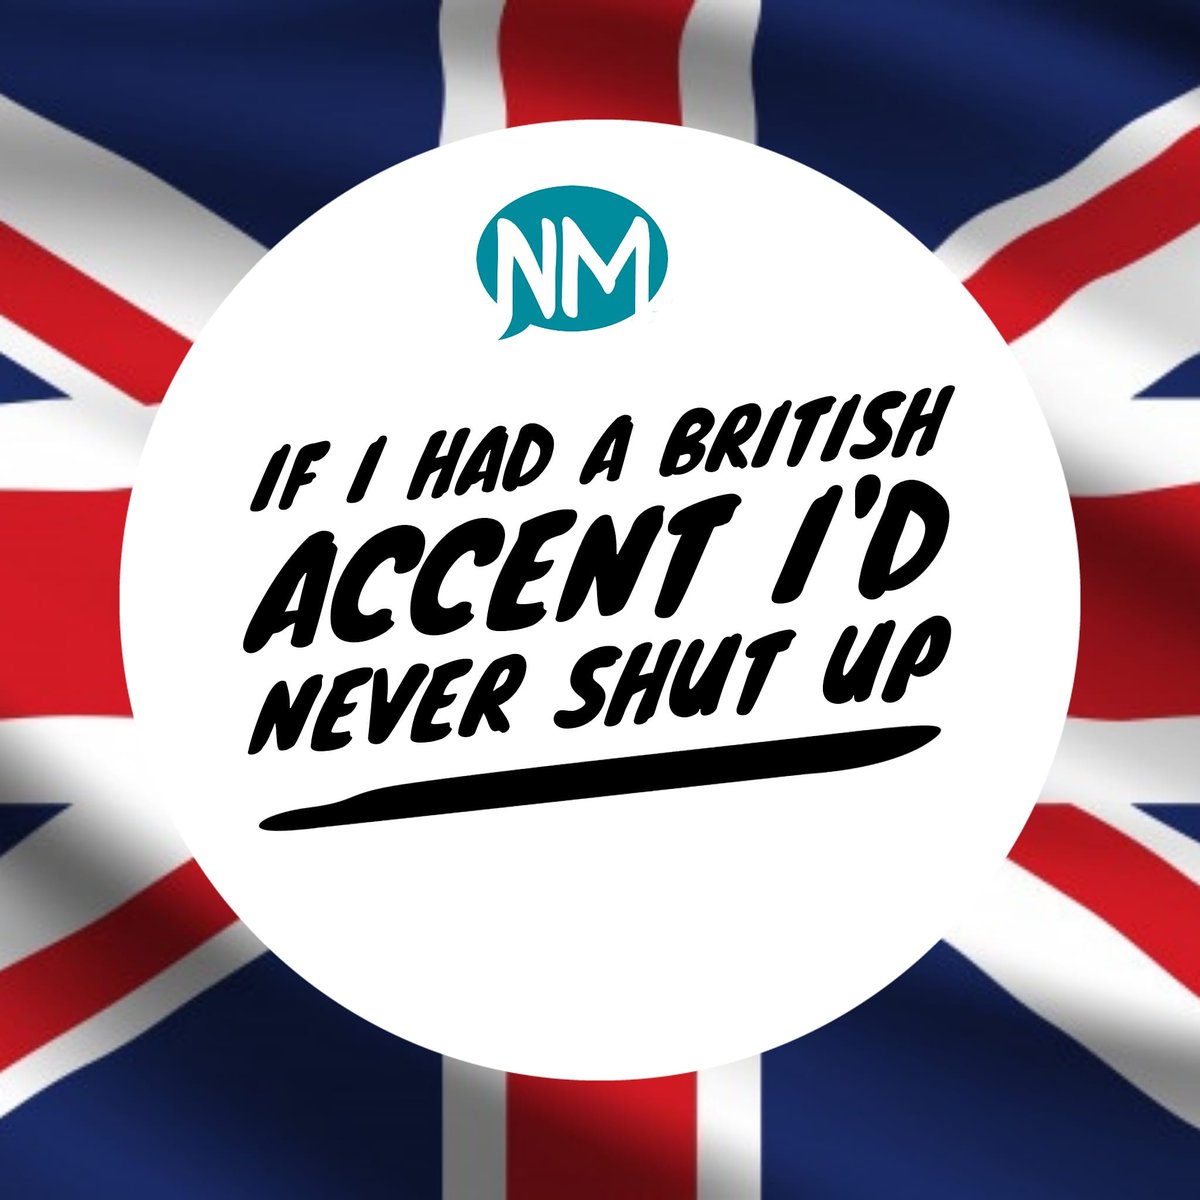 I already have one, you can too! RP Zoom workshop in March, details coming very soon! 🏴󠁧󠁢󠁥󠁮󠁧󠁿
.
.
.
#accentworkshop #accenttraining #accentcoaching #britishaccent #rpaccent #dialectcoaching #dialects #zoomworkshop #peterpanandwendy  #vancouver #acting #actors #vancouveractor